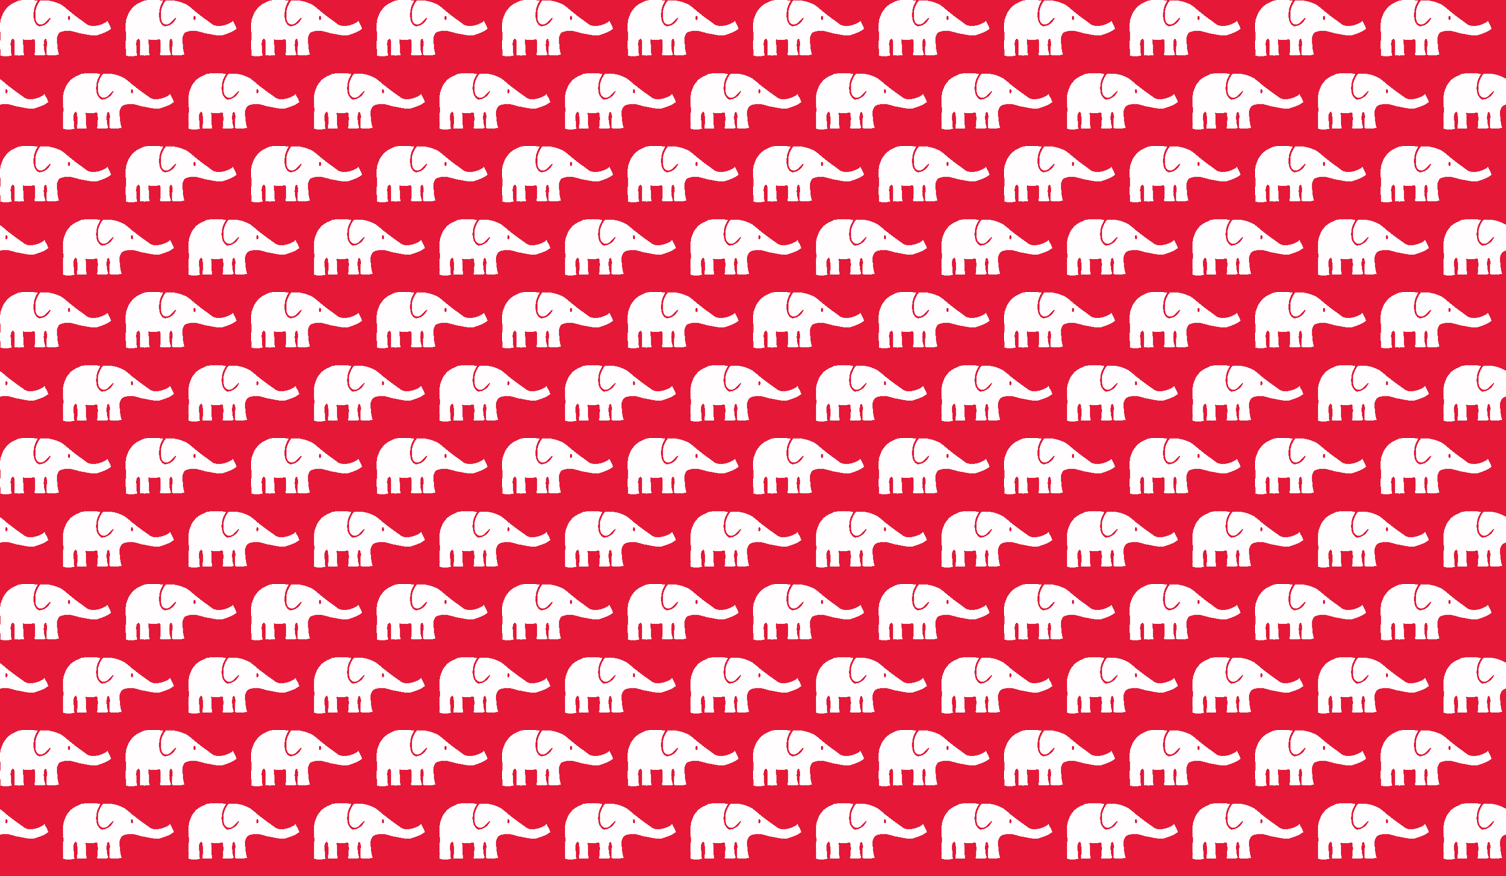 Elephant Print Wallpaper Small Elephants In Red